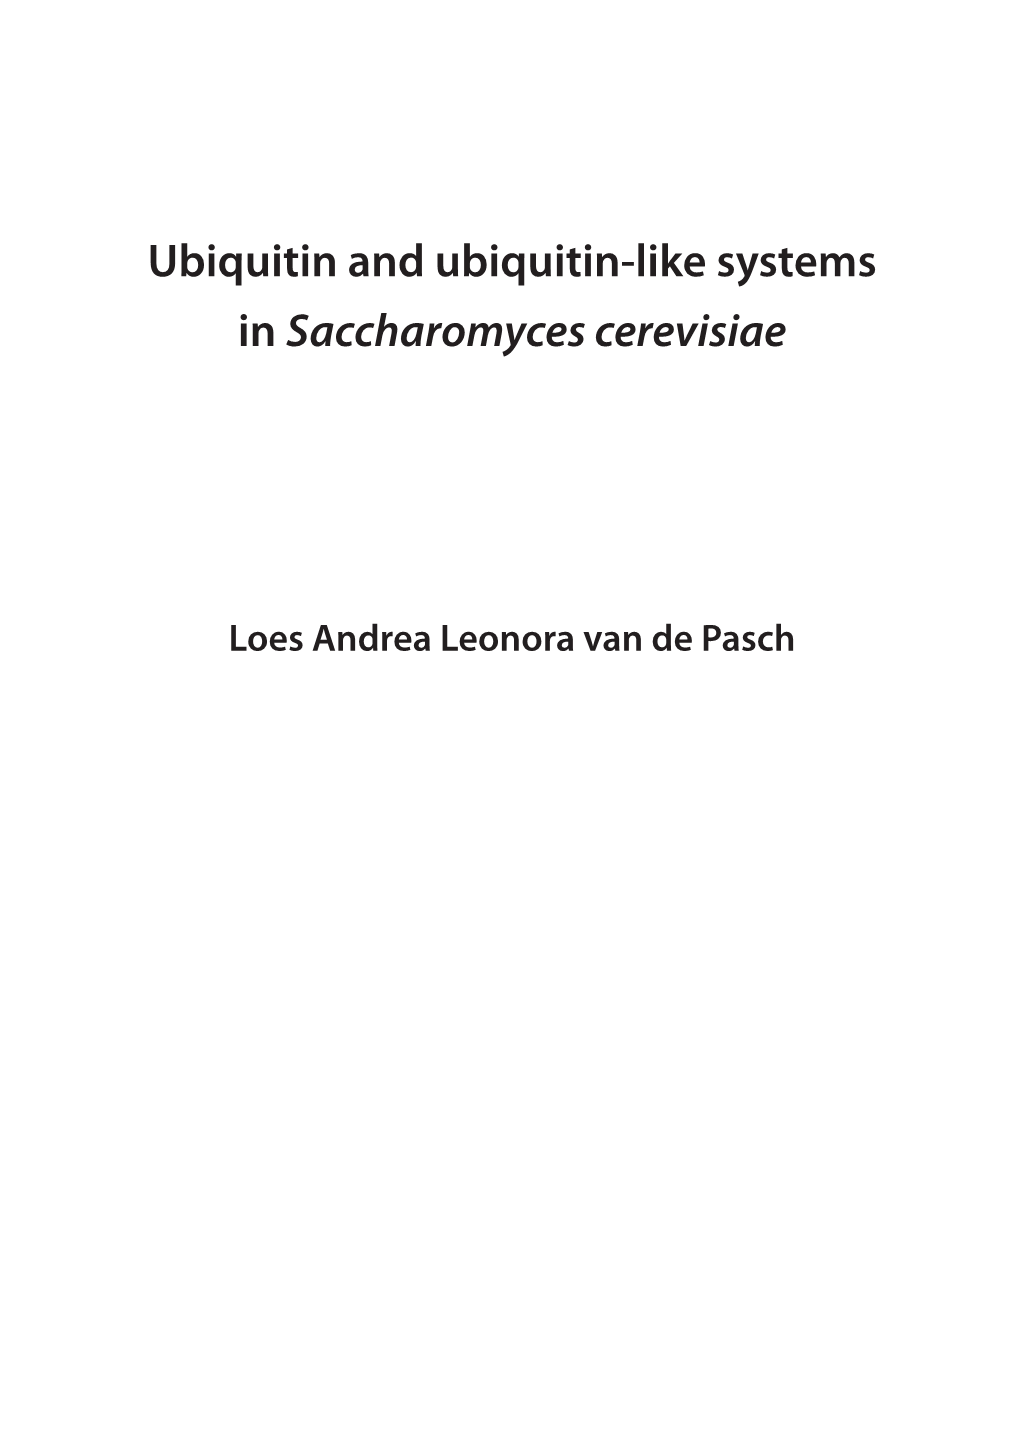 Ubiquitin and Ubiquitin-Like Systems in Saccharomyces Cerevisiae